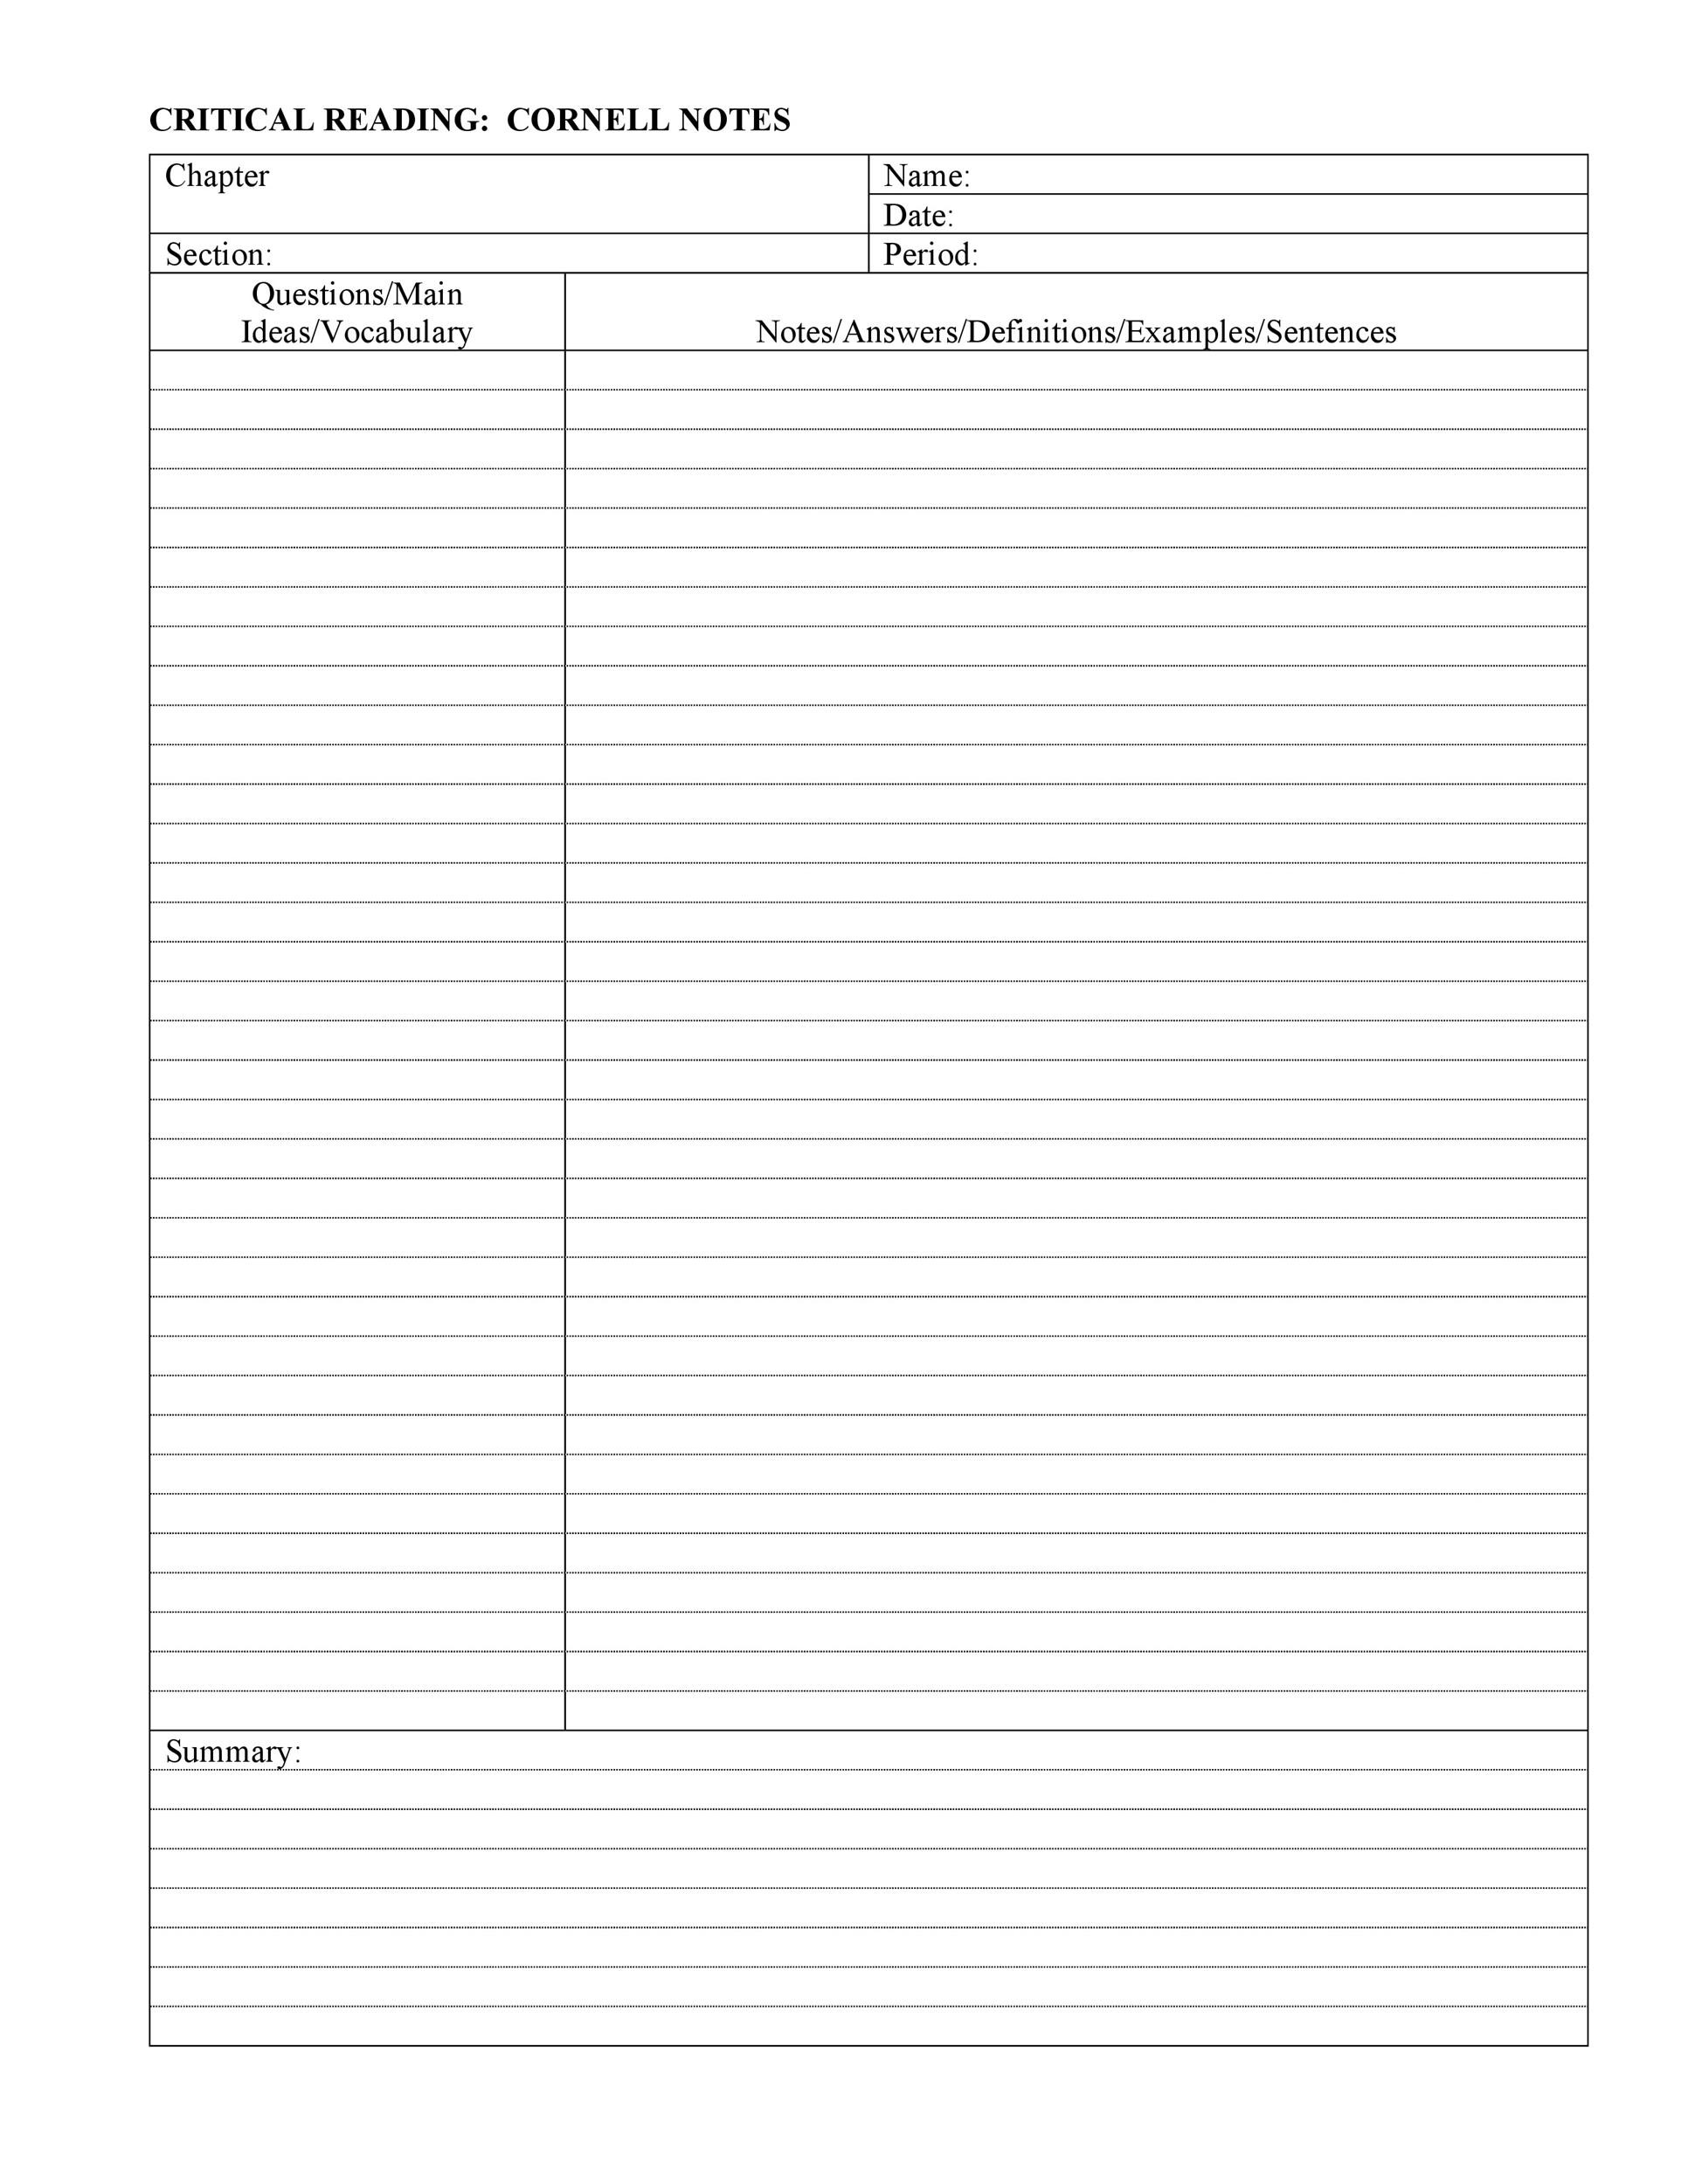 Blank Vocabulary Worksheet Template 37 Cornell Notes Templates &amp; Examples [word Excel Pdf]